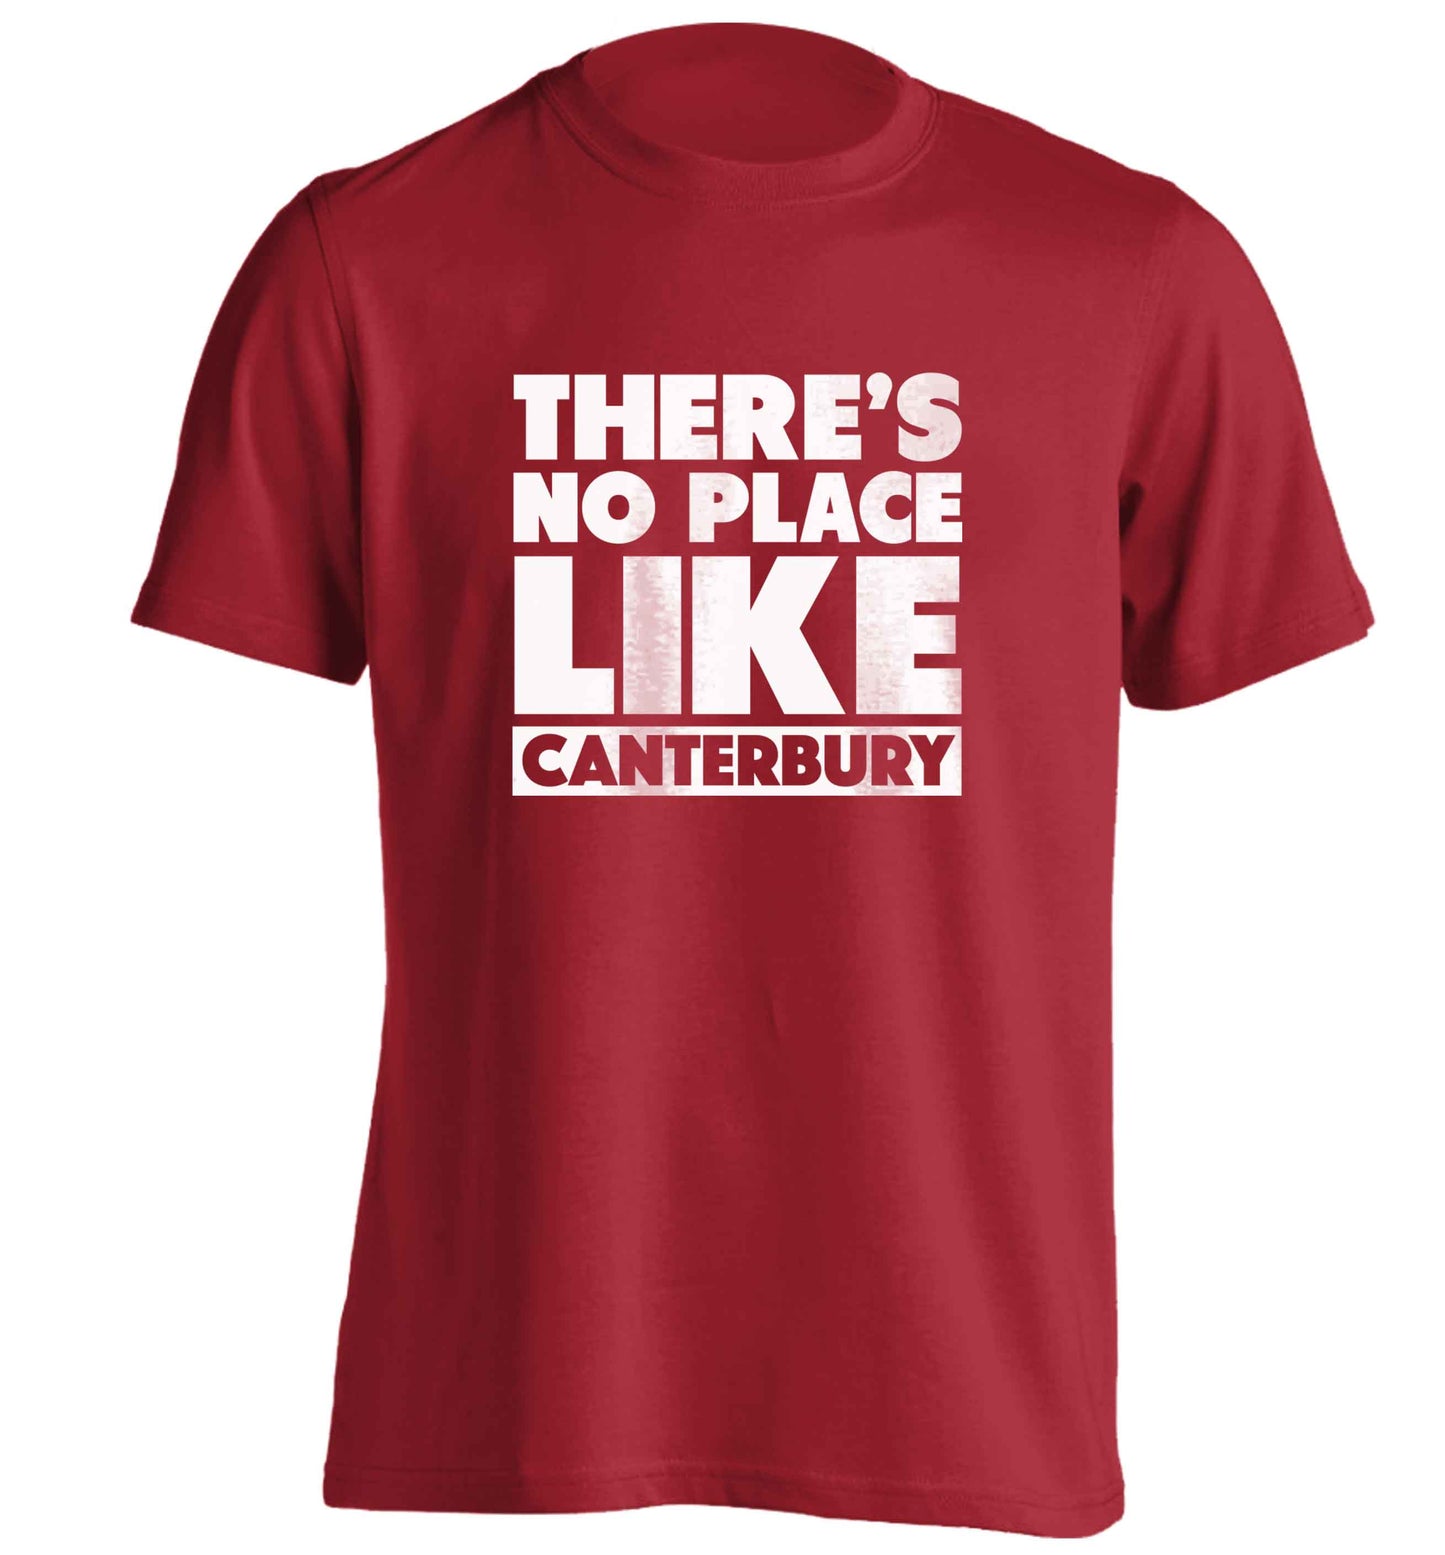 There's no place like Canterbury adults unisex red Tshirt 2XL